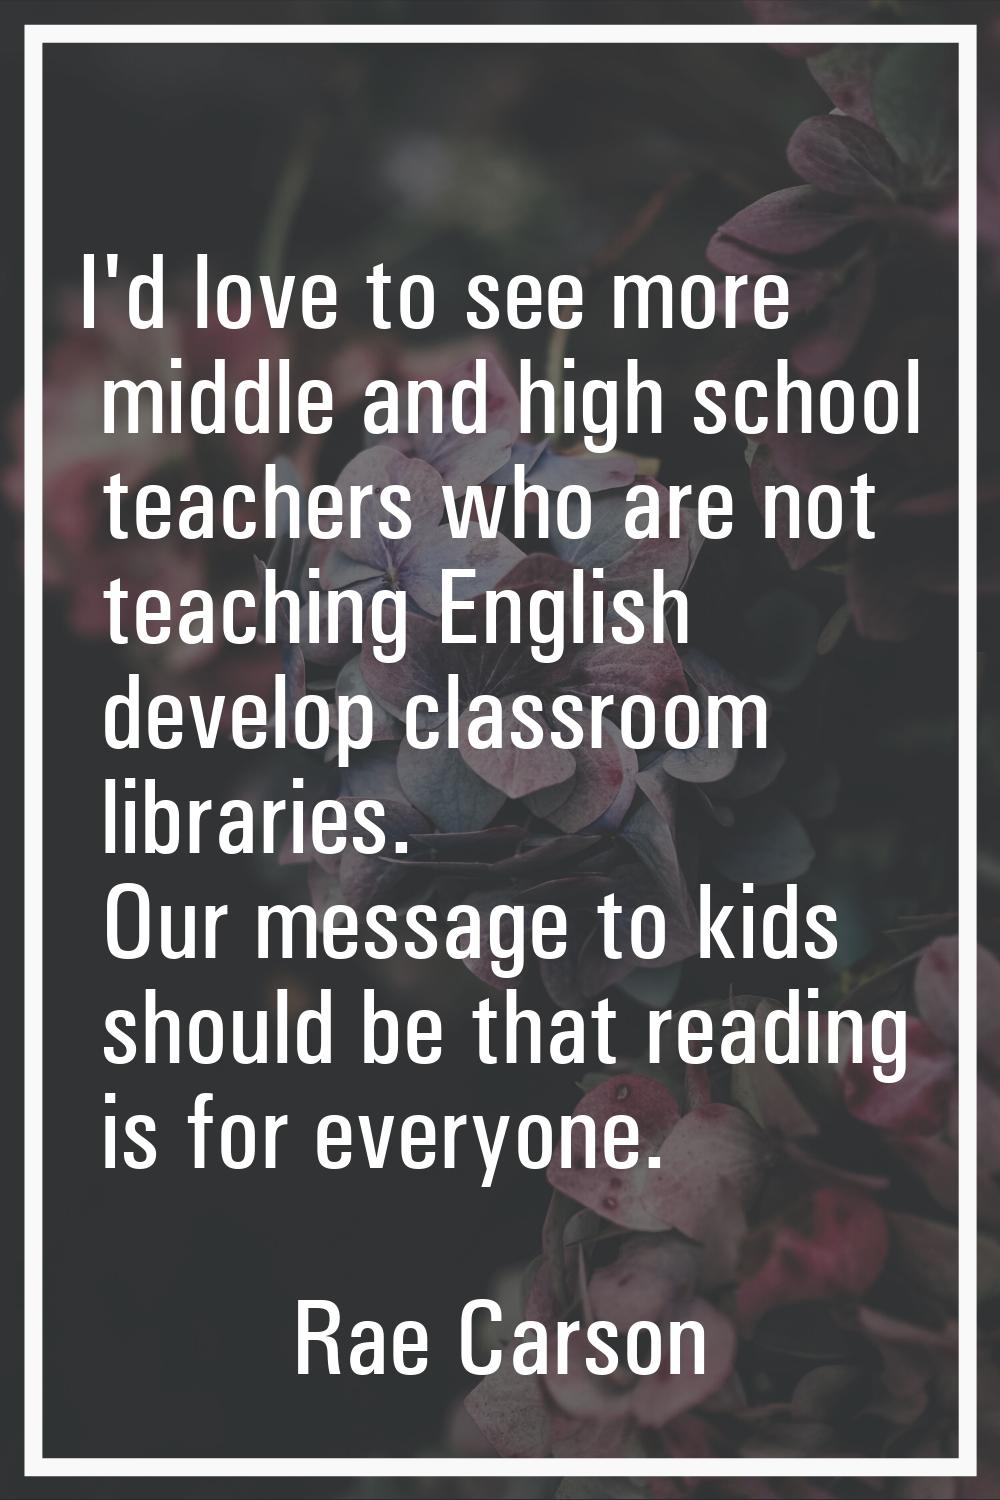 I'd love to see more middle and high school teachers who are not teaching English develop classroom